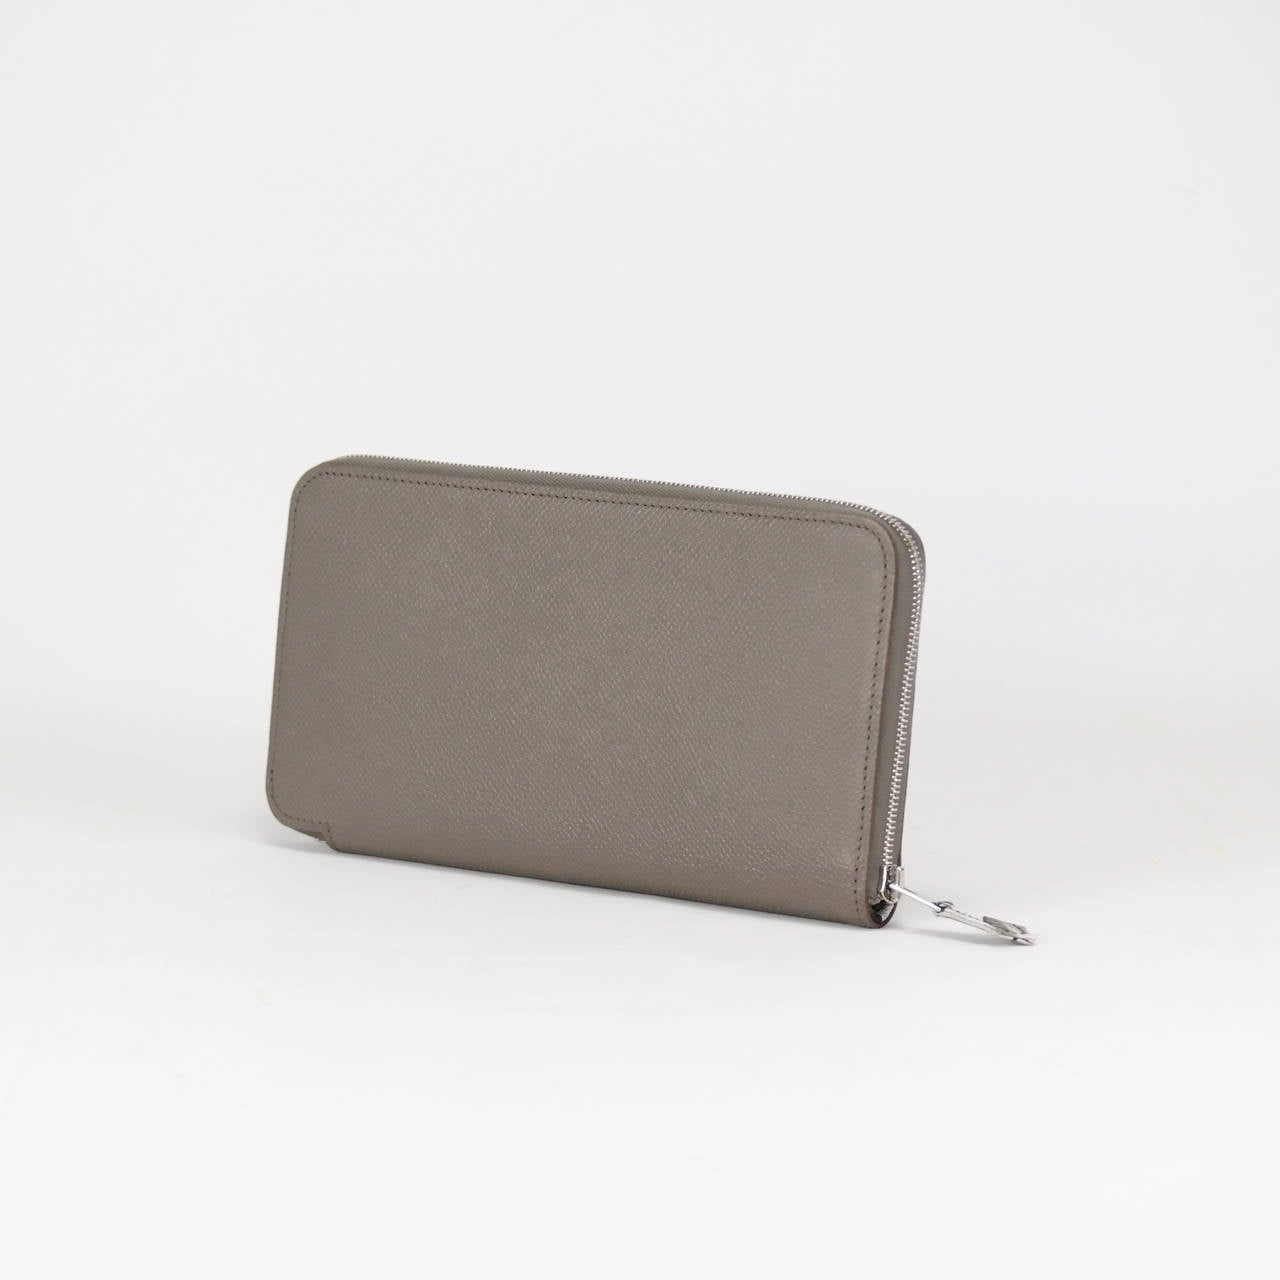 Hermes Wallet AZAP ETAIN Epsom Brasil PALLADIUM Hardware

Pre-owned and never used

Dimension: 20cm width x 10cm height x 2cm length

Color:  ETAIN

The Retail Price in store is 805€. We sell it for 740€.

Details:

With the protective